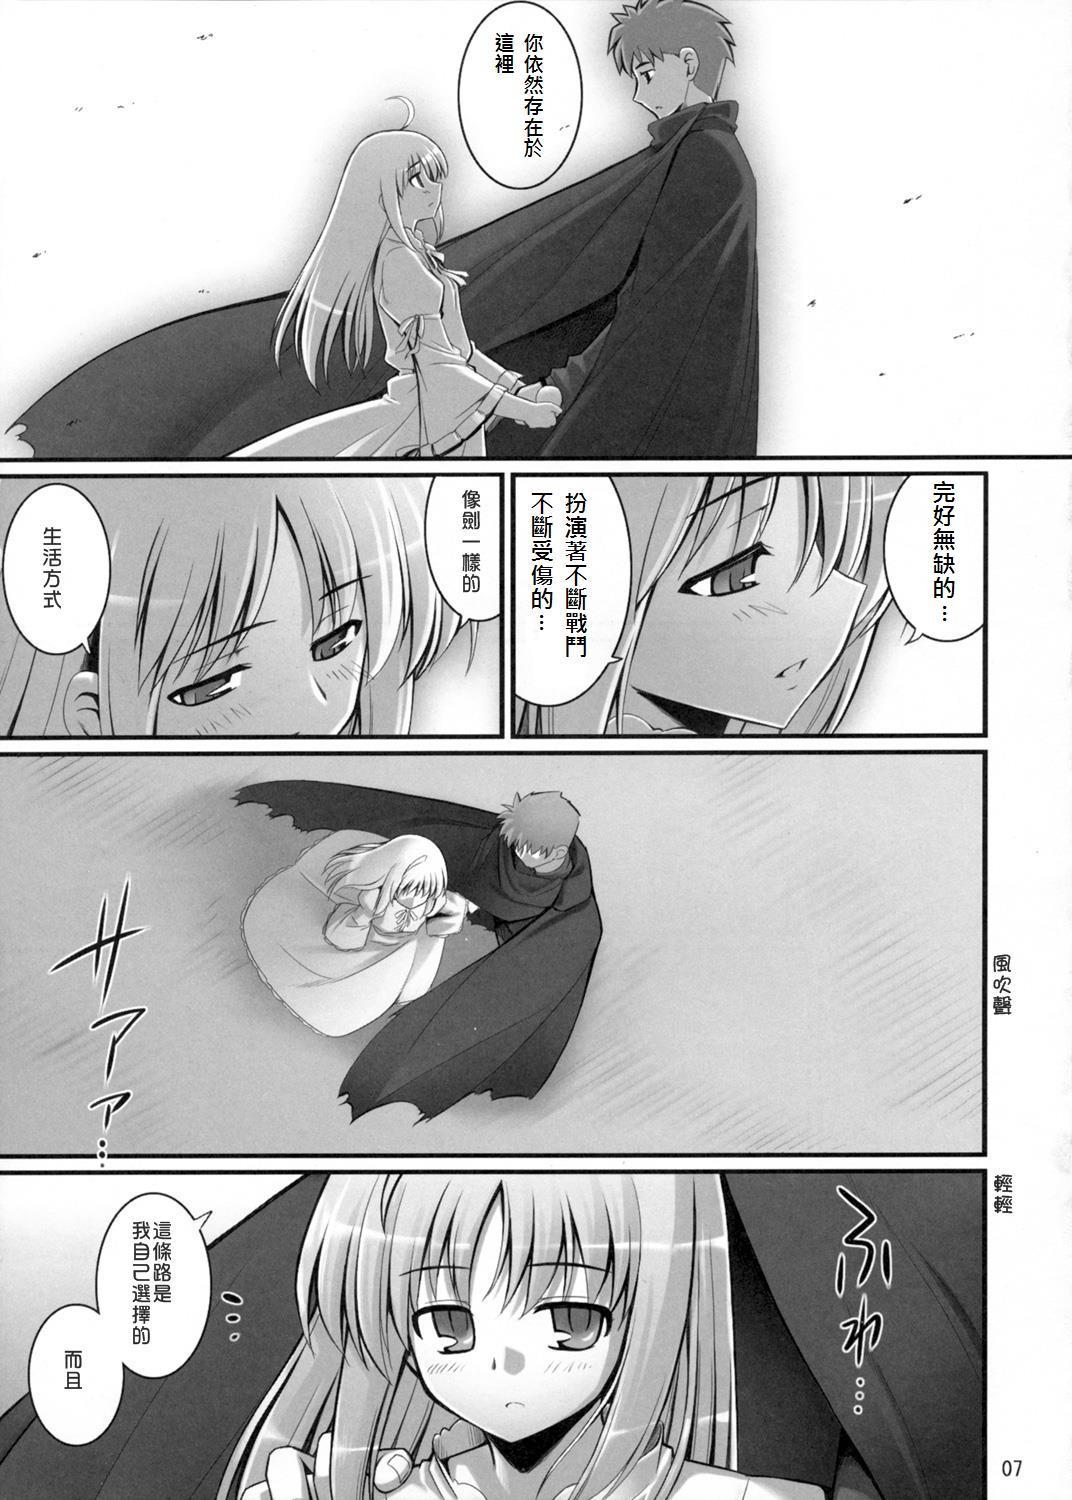 Bribe RE 06 - Fate stay night Natural Tits - Page 7